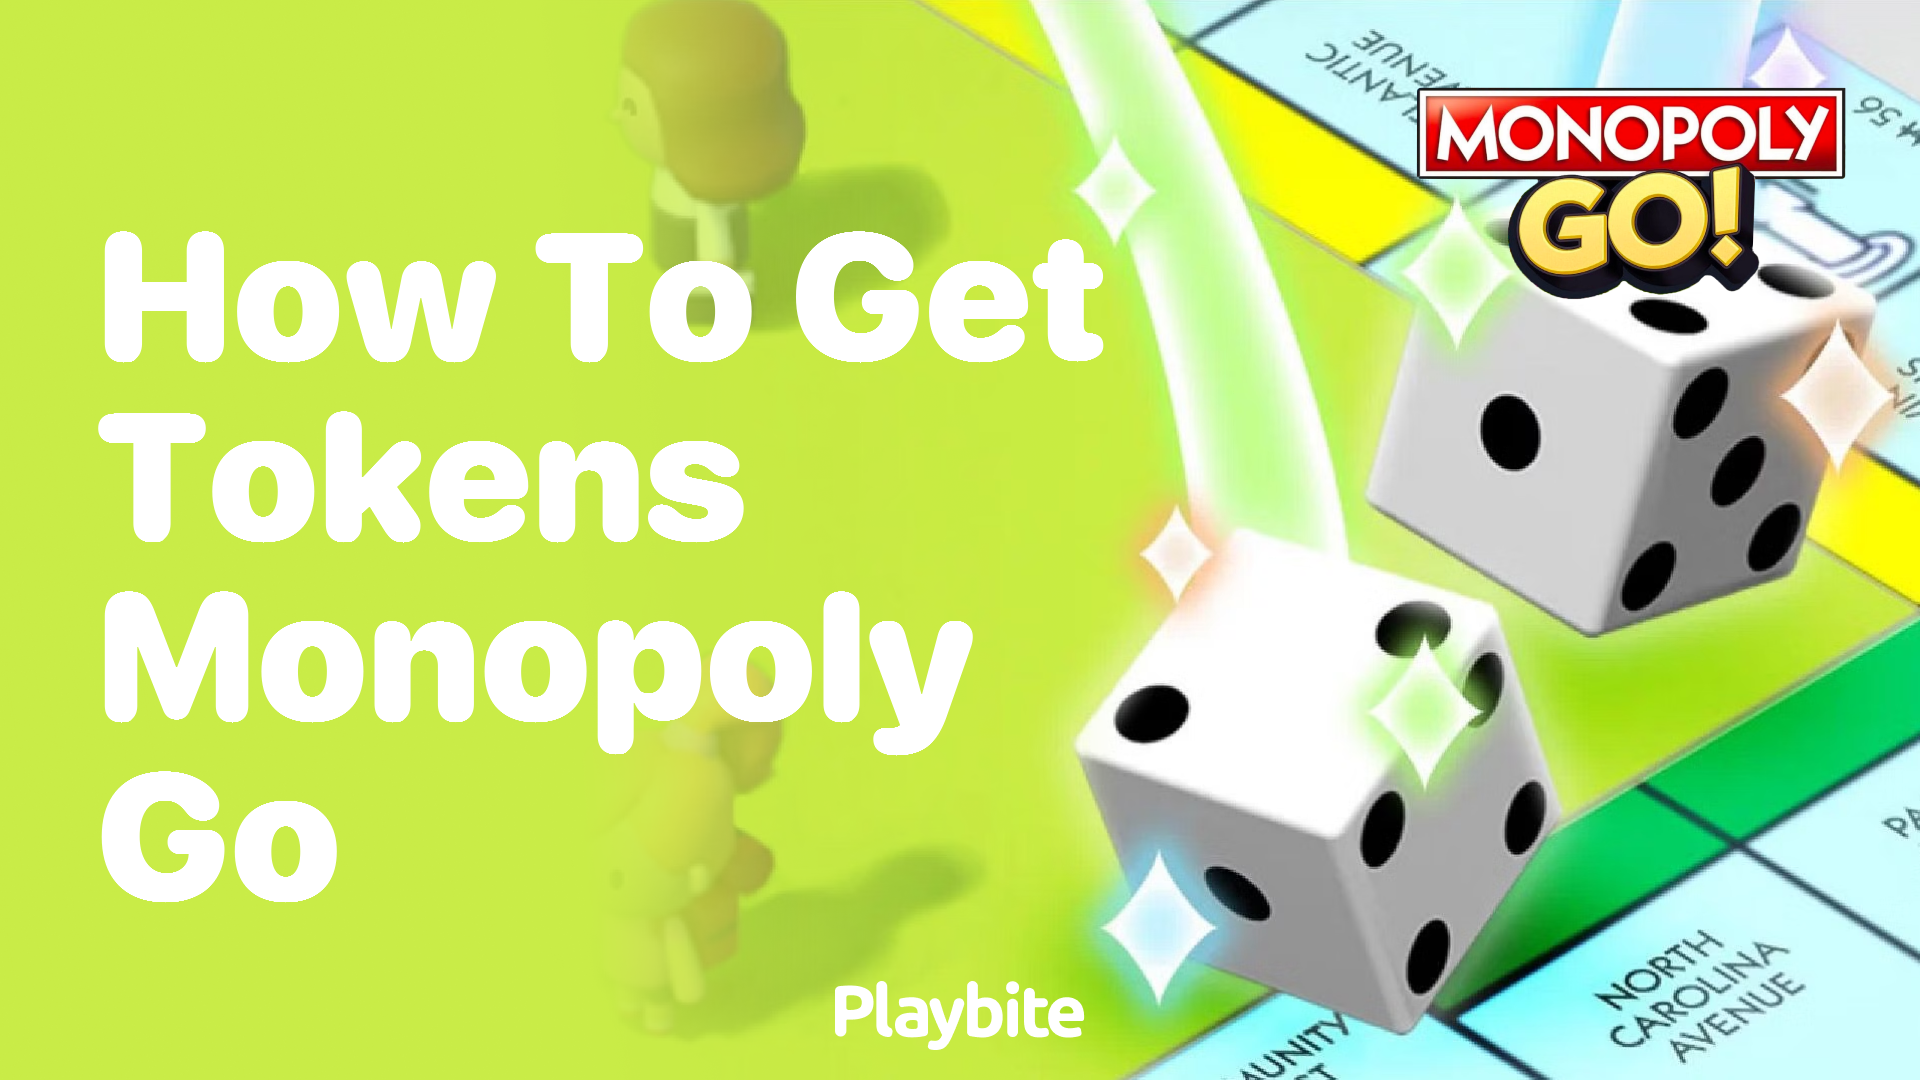 How to Get Tokens in Monopoly Go